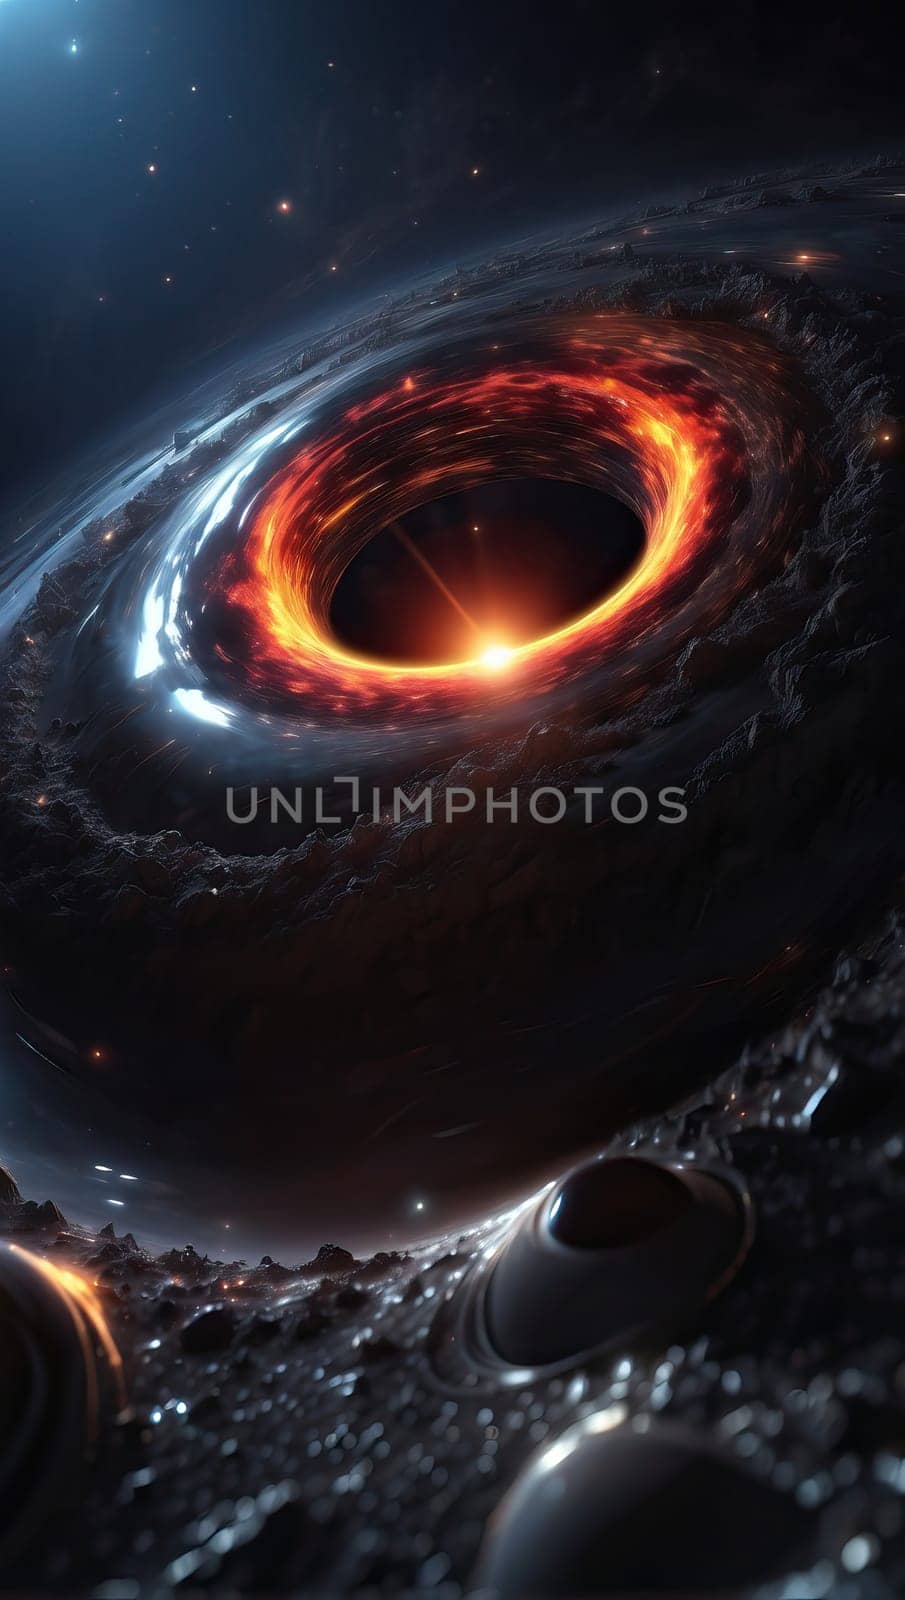 Black hole in space by applesstock